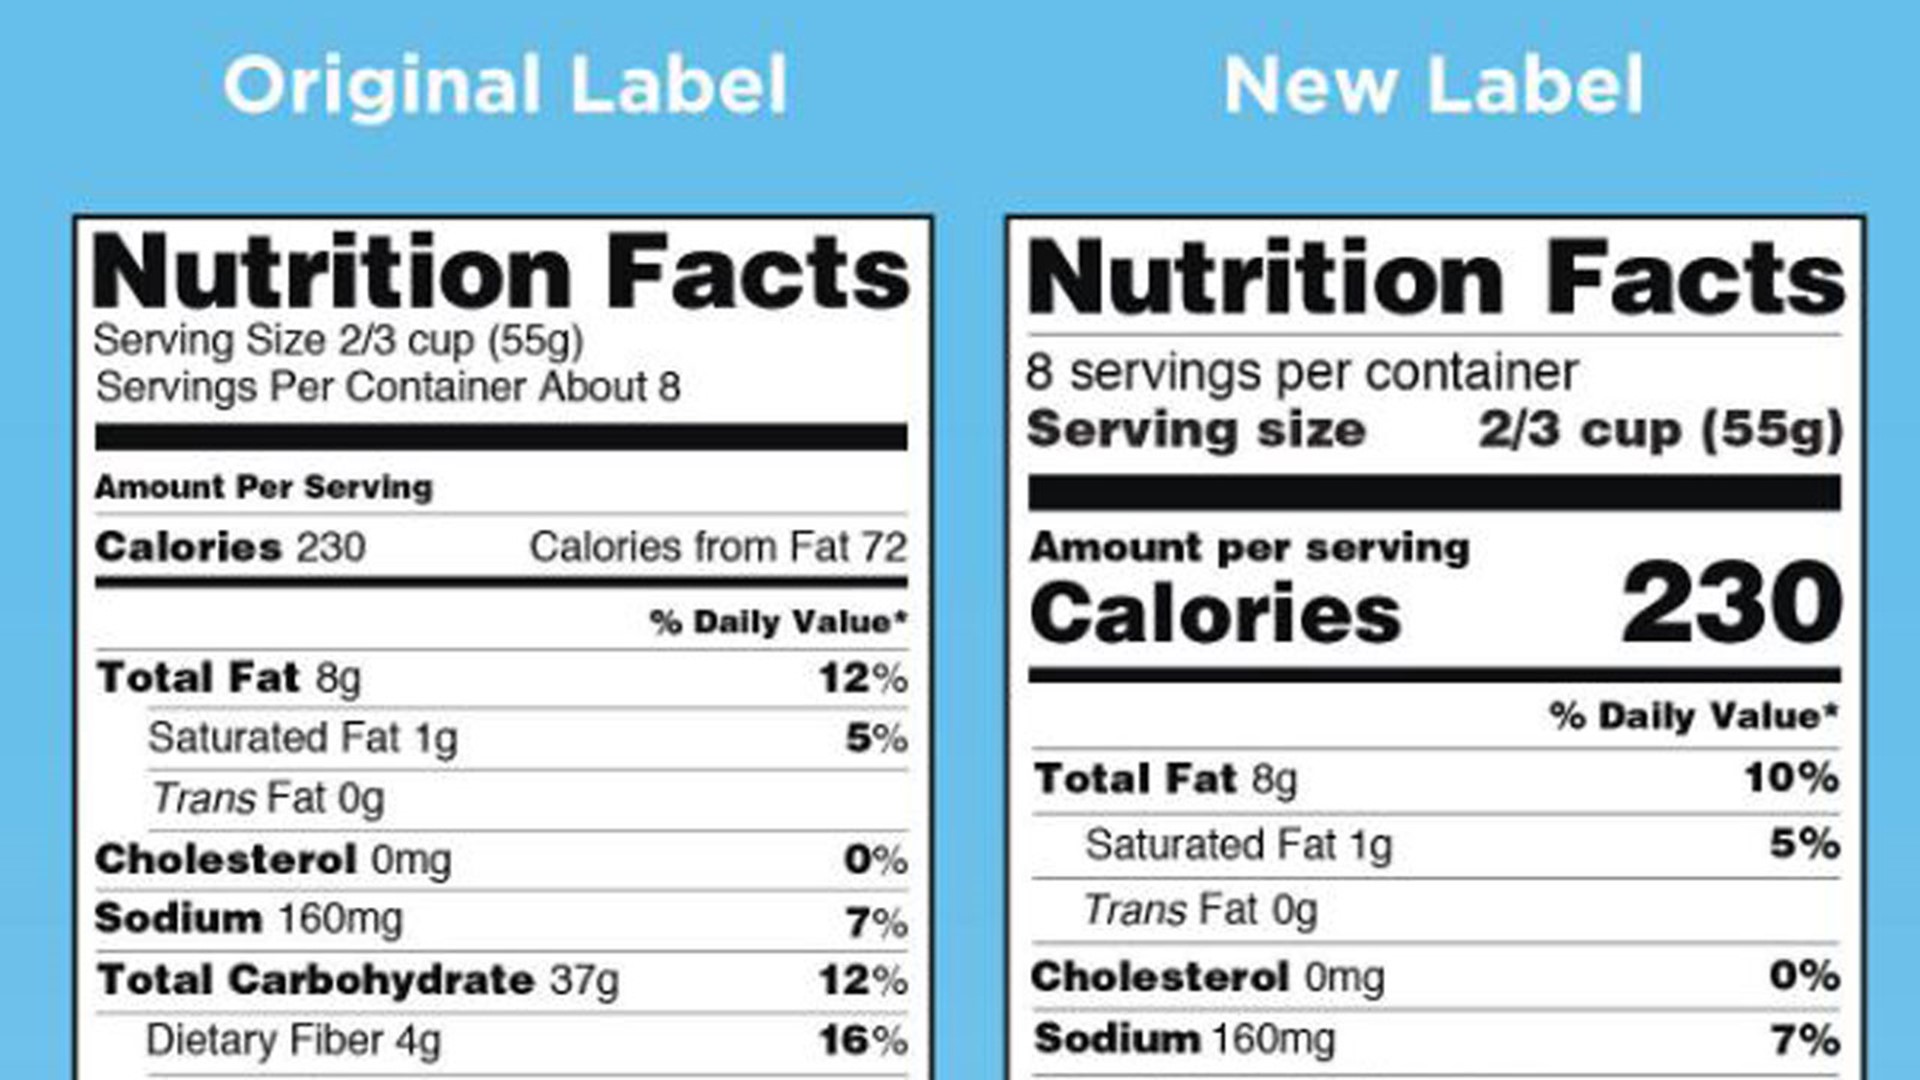 Food labels can be overwhelming. Many people know they should be checking out food labels, but don’t because “they are confusing.”  A recent study from the Journal of the Academy of Nutrition and Dietetics revealed that individuals were more likely to purchase snacks with health claims, even if they are not really healthy. Mercy Health Registered Dietitian Amy Bragagnini provides some quick tips for reading food labels.